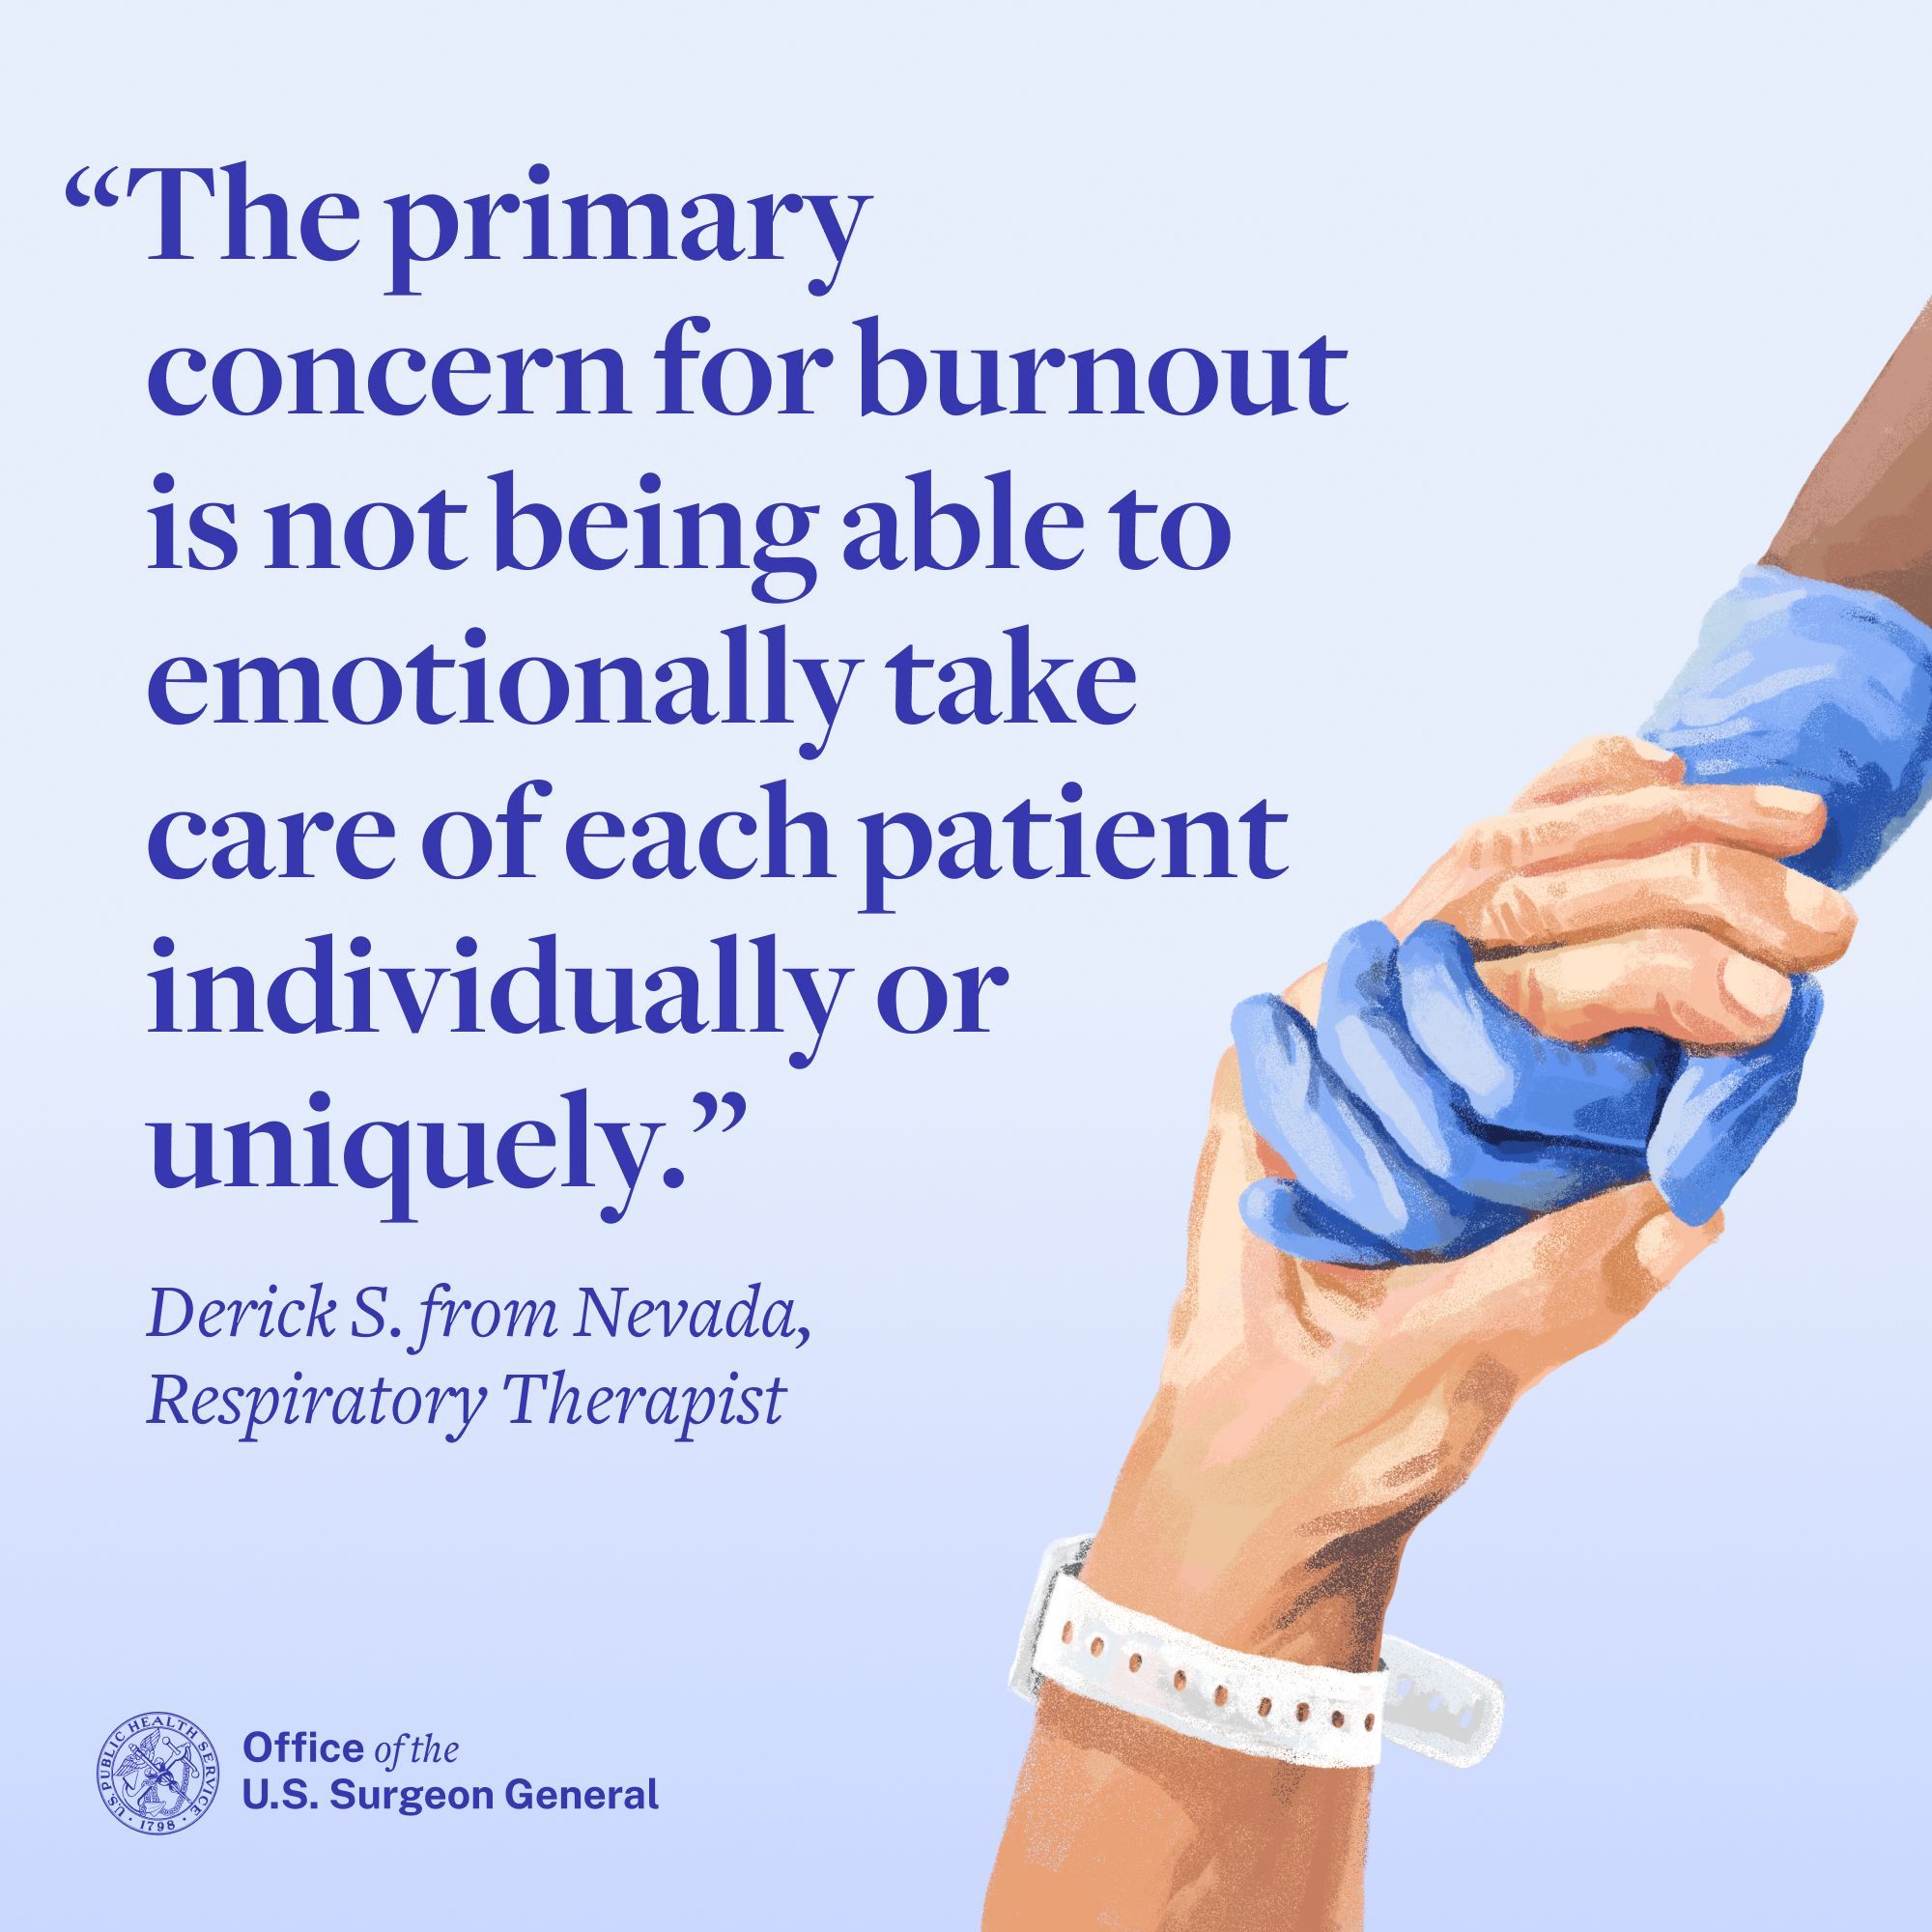 "The primary concern for burnout is not being able to emotionally take care of each patient individually or uniquely." Derick S. from Nevada, Respiratory Therapist